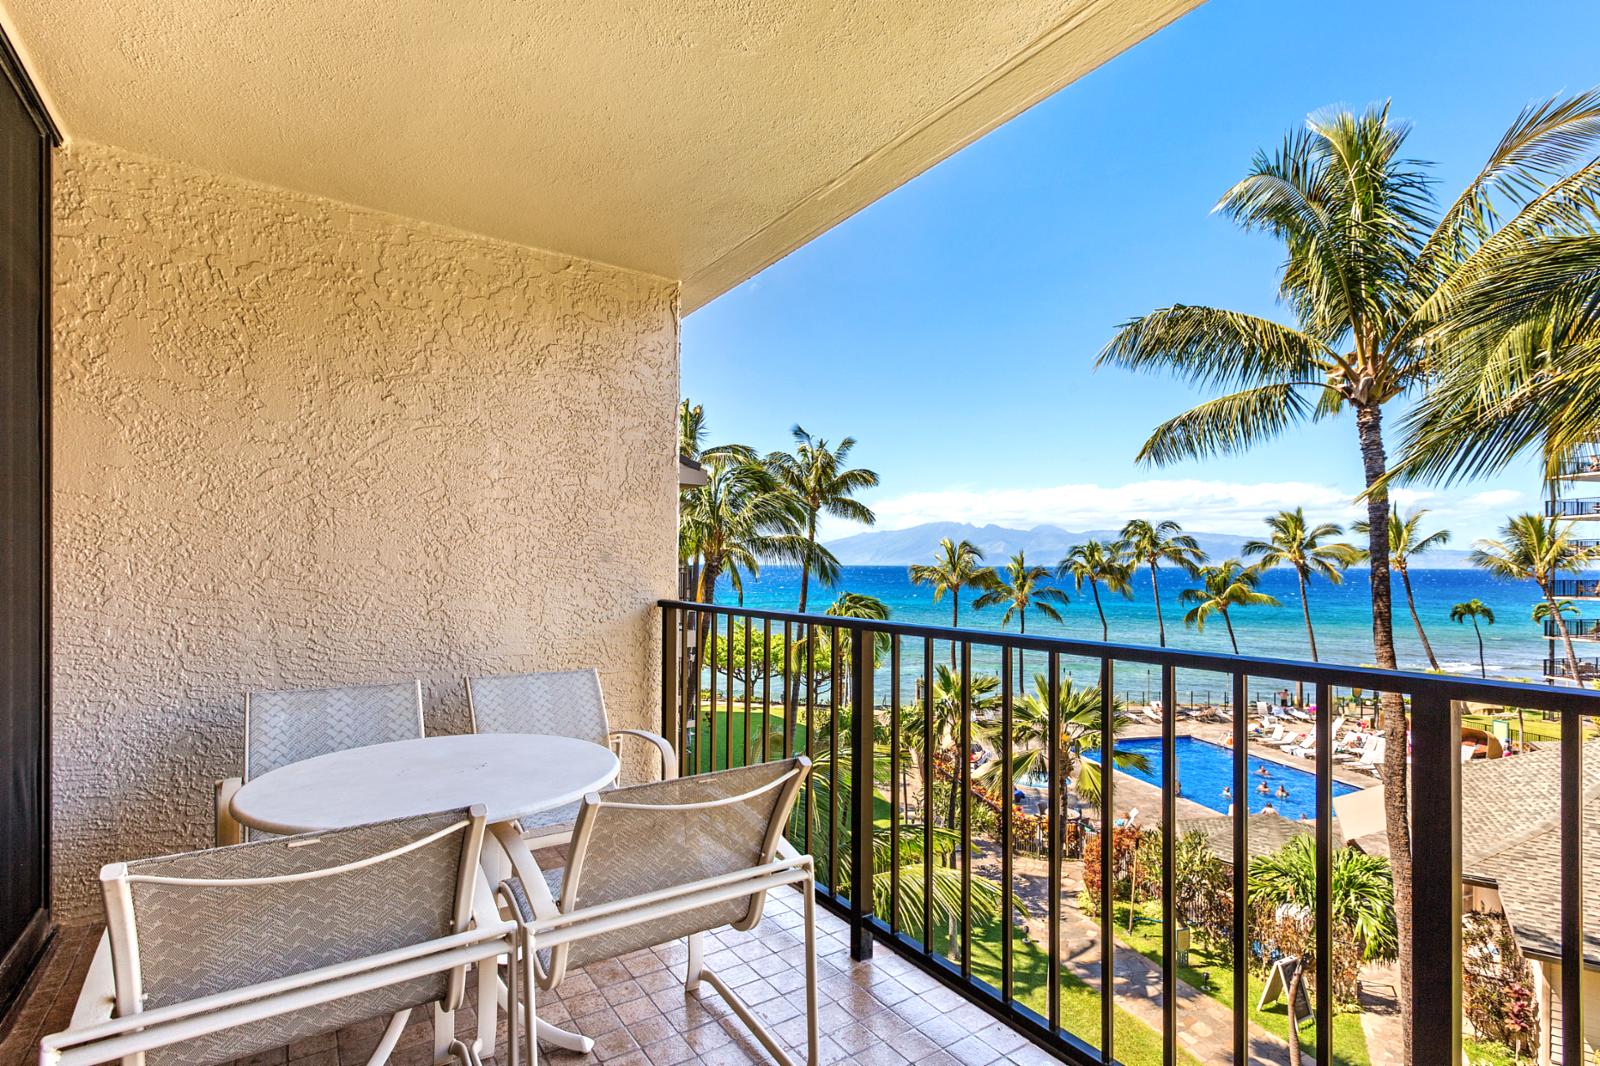 Welcome to this island oasis and views of Molokai and the oversized resort grounds